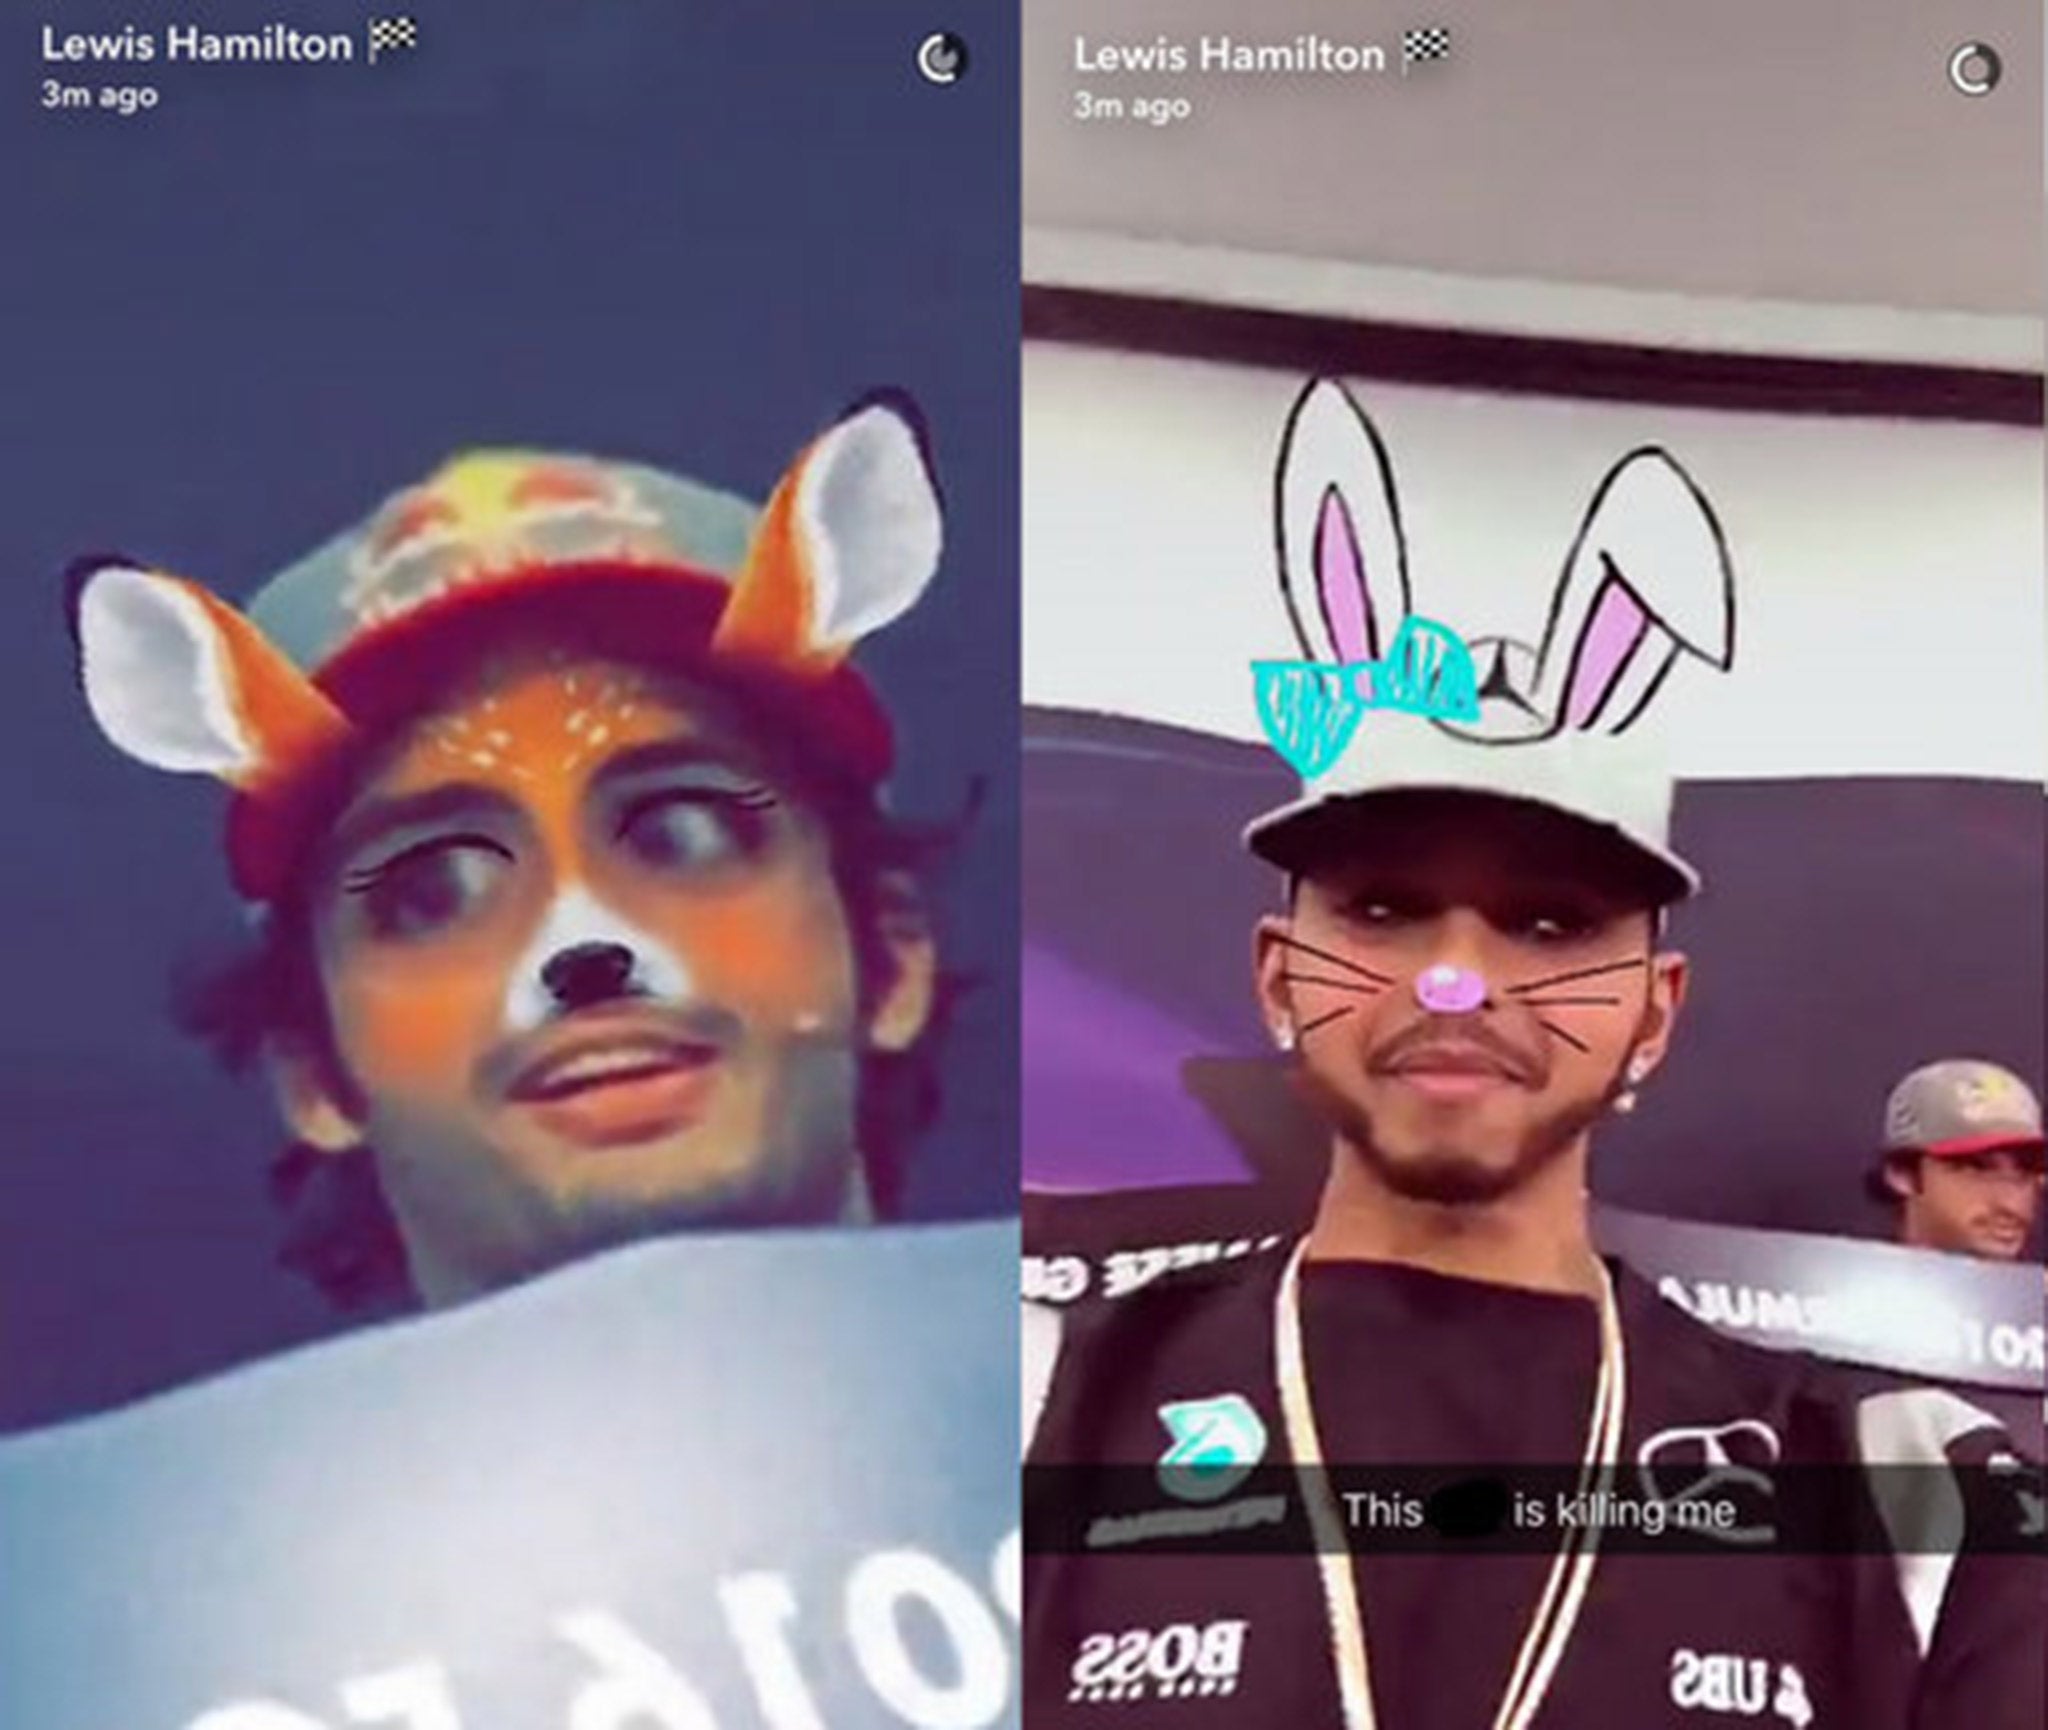 Lewis Hamilton has been criticised for taking Snapchat selfies during the drivers' press conference in Japan